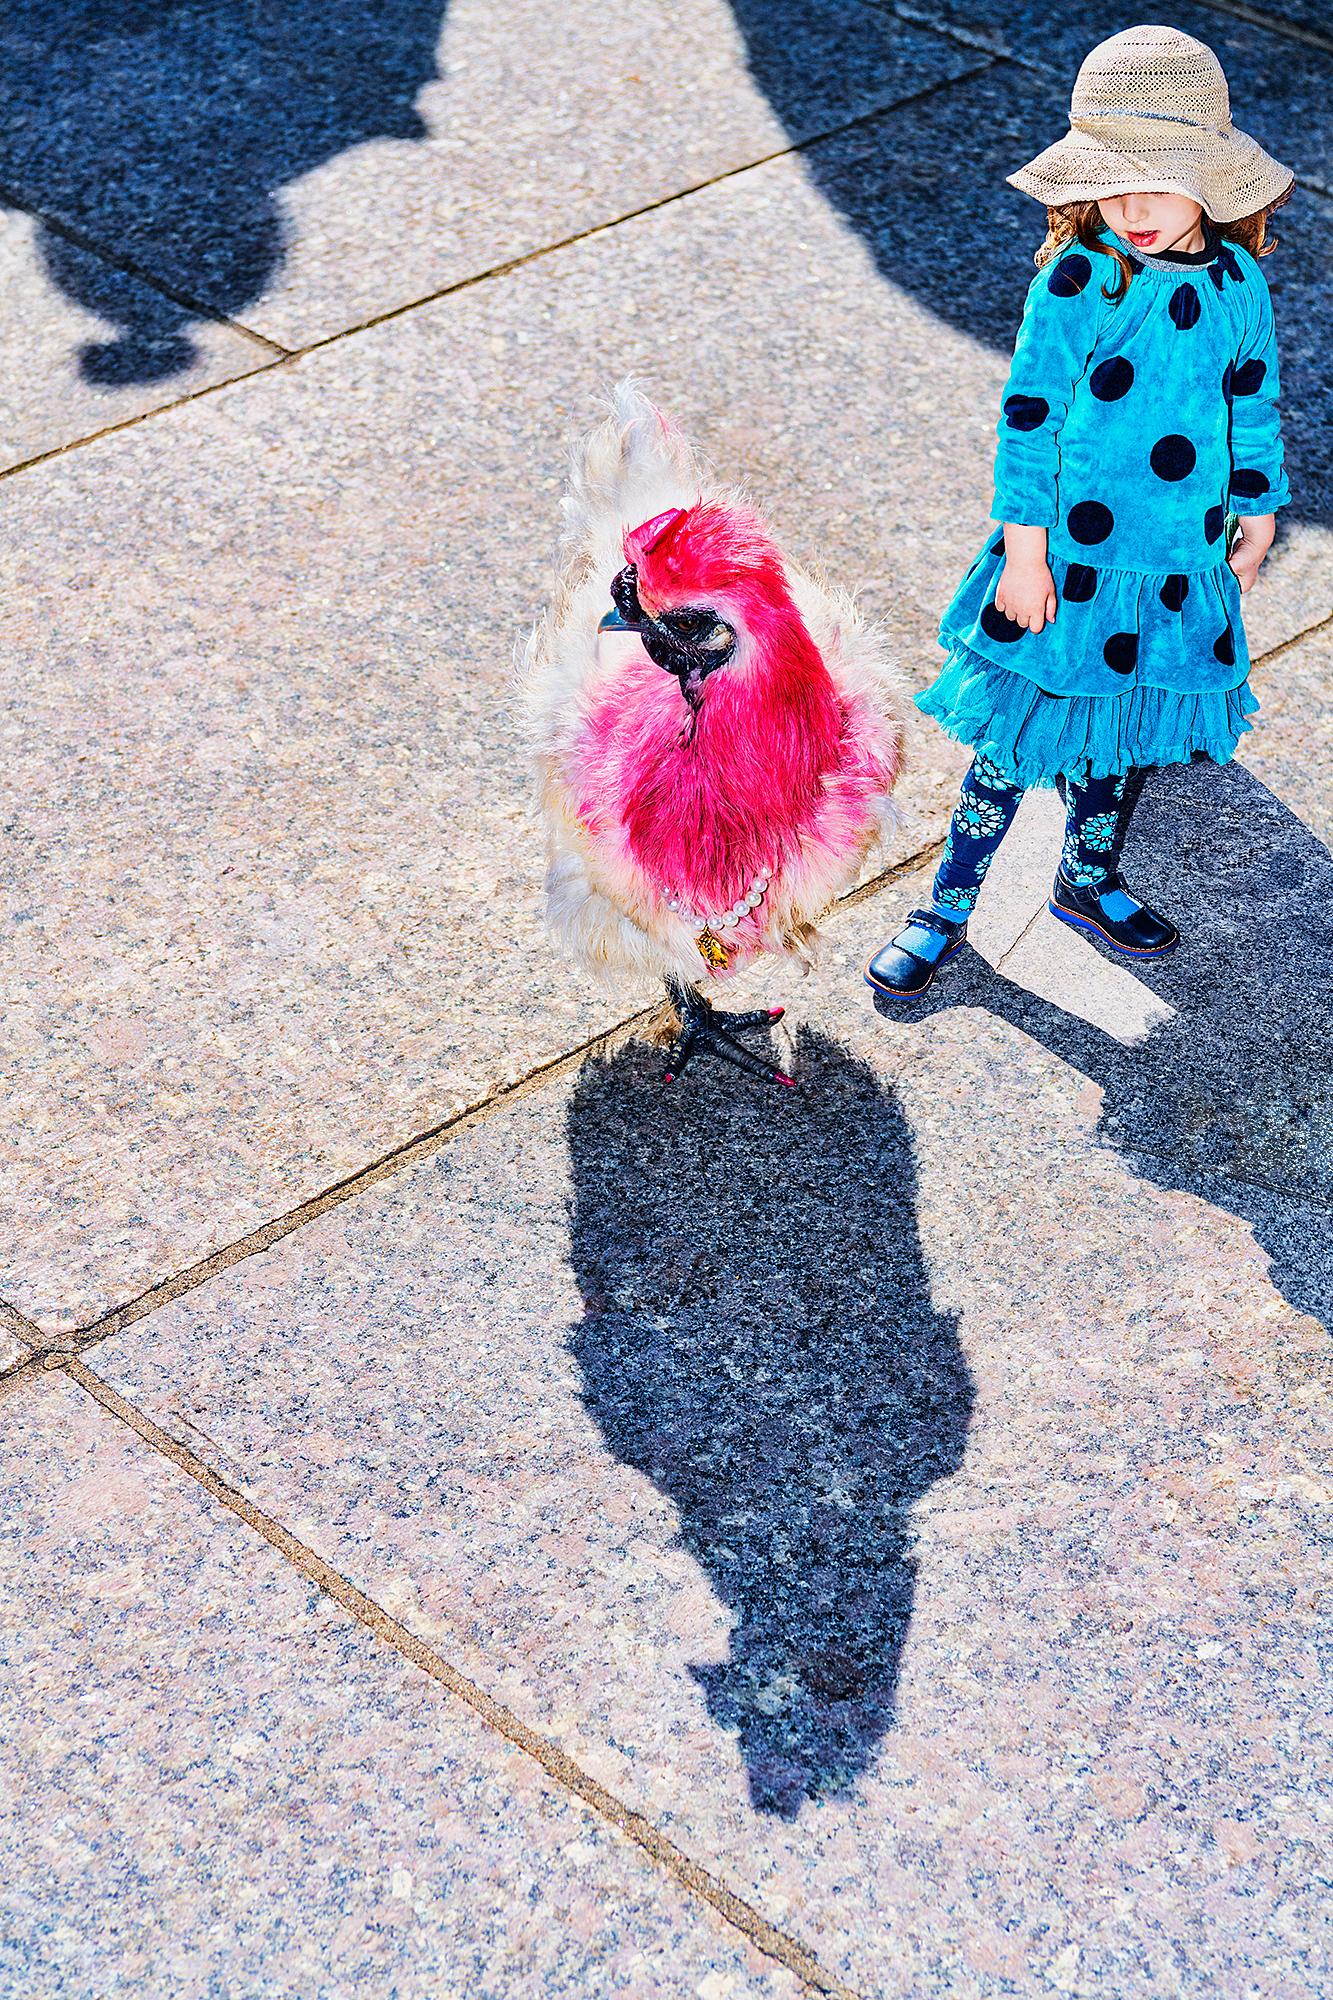 Funky Red Chicken and Girl with Dreamy Blue Dress